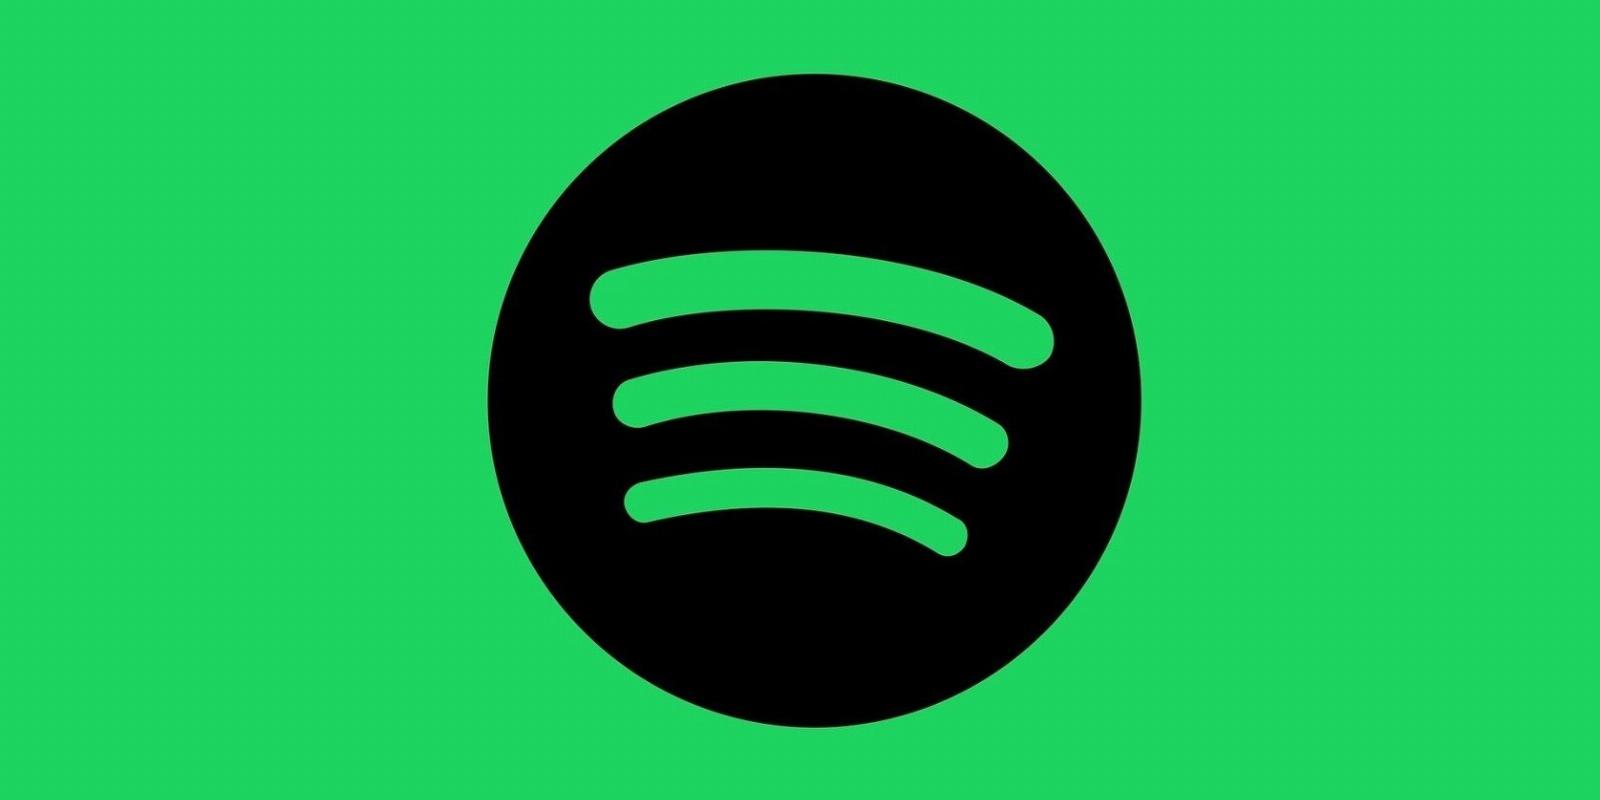 How to Fix ‘A firewall may be blocking Spotify’ Error